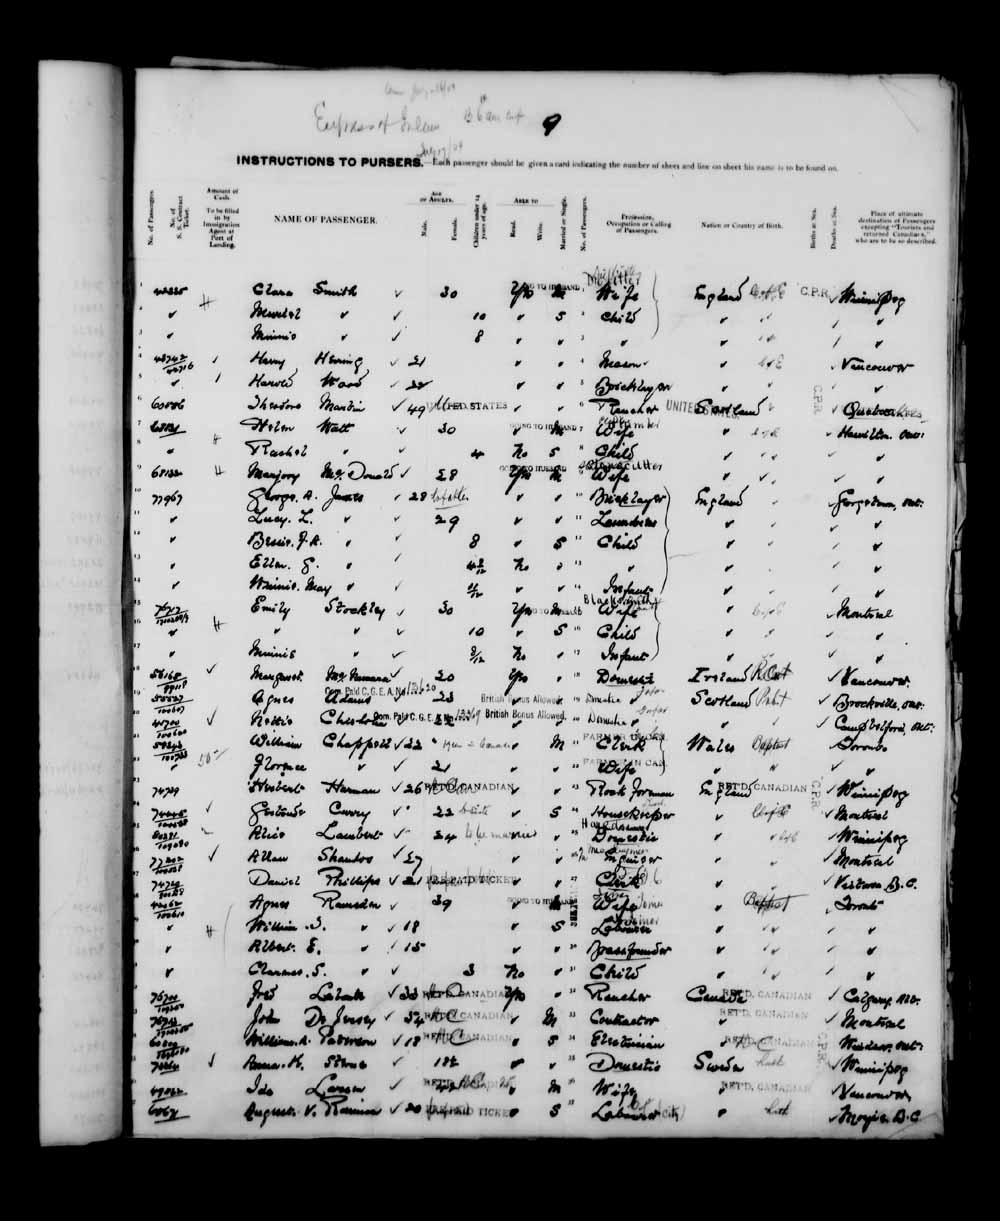 Digitized page of Quebec Passenger Lists for Image No.: e003591259